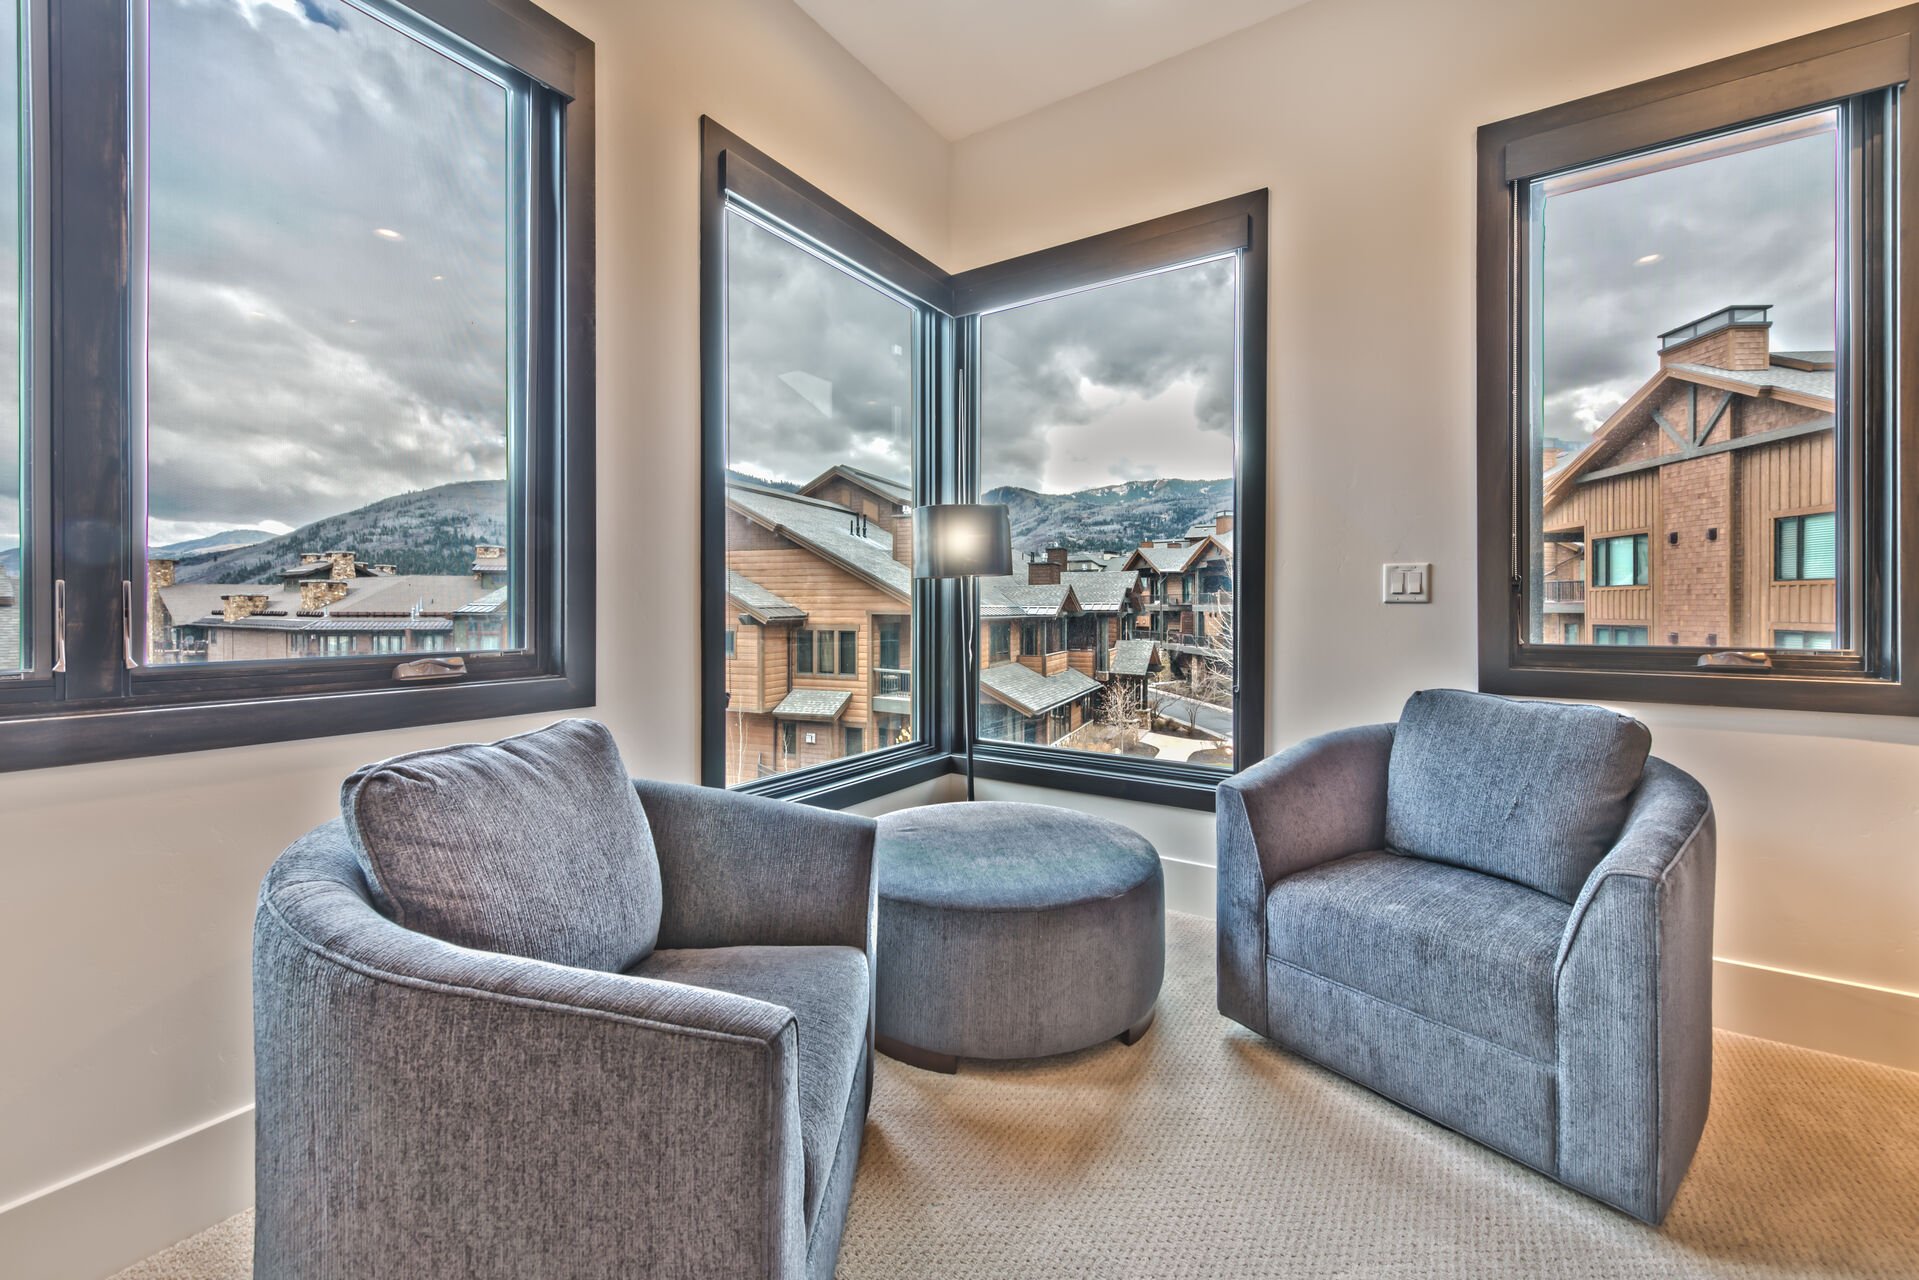 Master Bedroom Sitting Area with Great Views